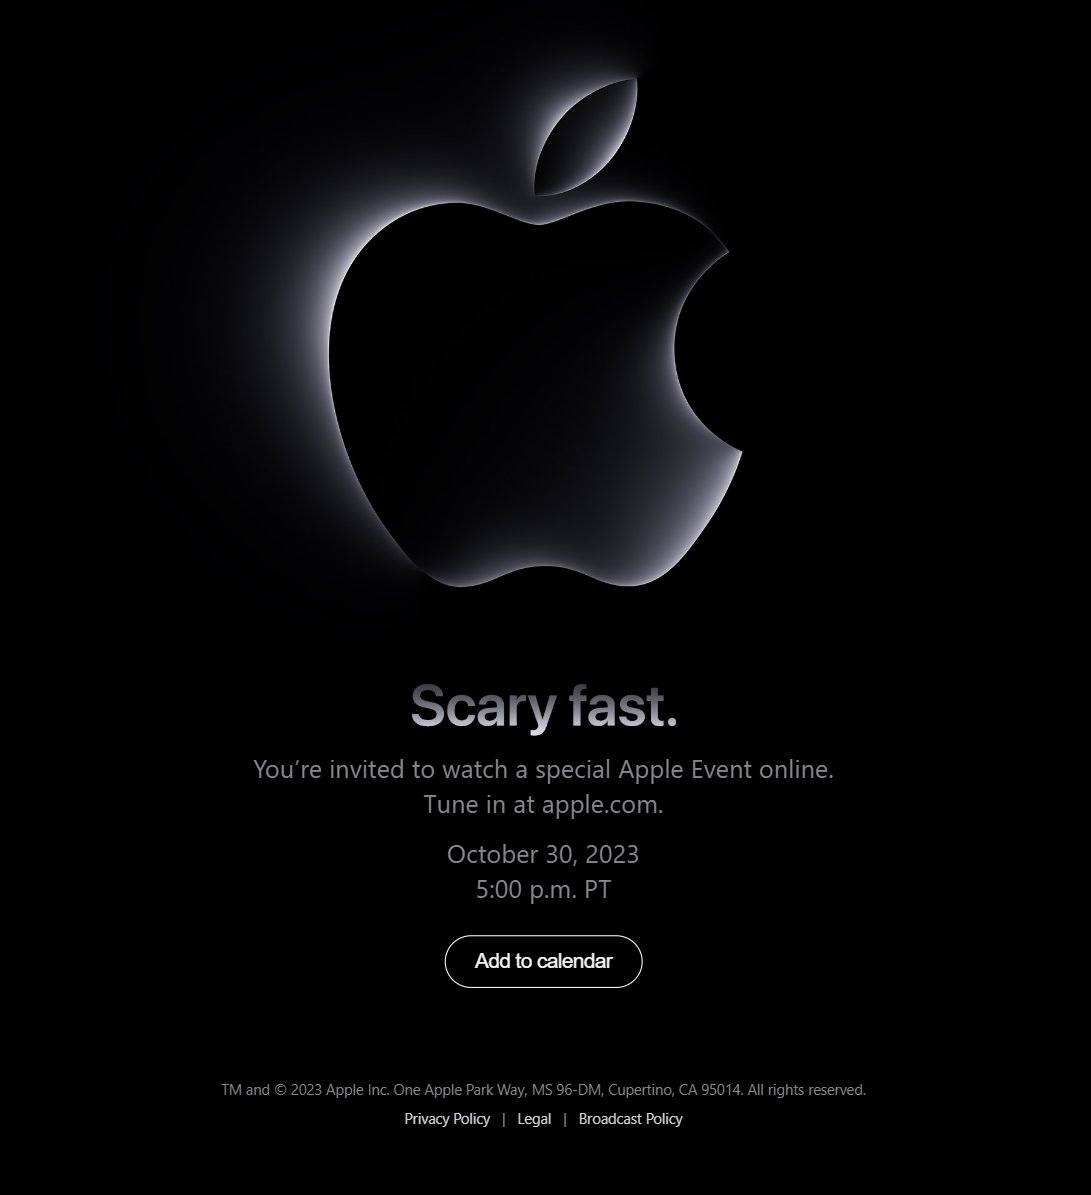 The apple event #Scaryfast is happening today. New macs and ipads could come. What are your expectations? New M3 chipsets could launch today ! Way too excited for the new mac capabilities.. #AppleEvent #Apple Invitations already came India timing is 5:30 am 😵‍💫 have to wake up…